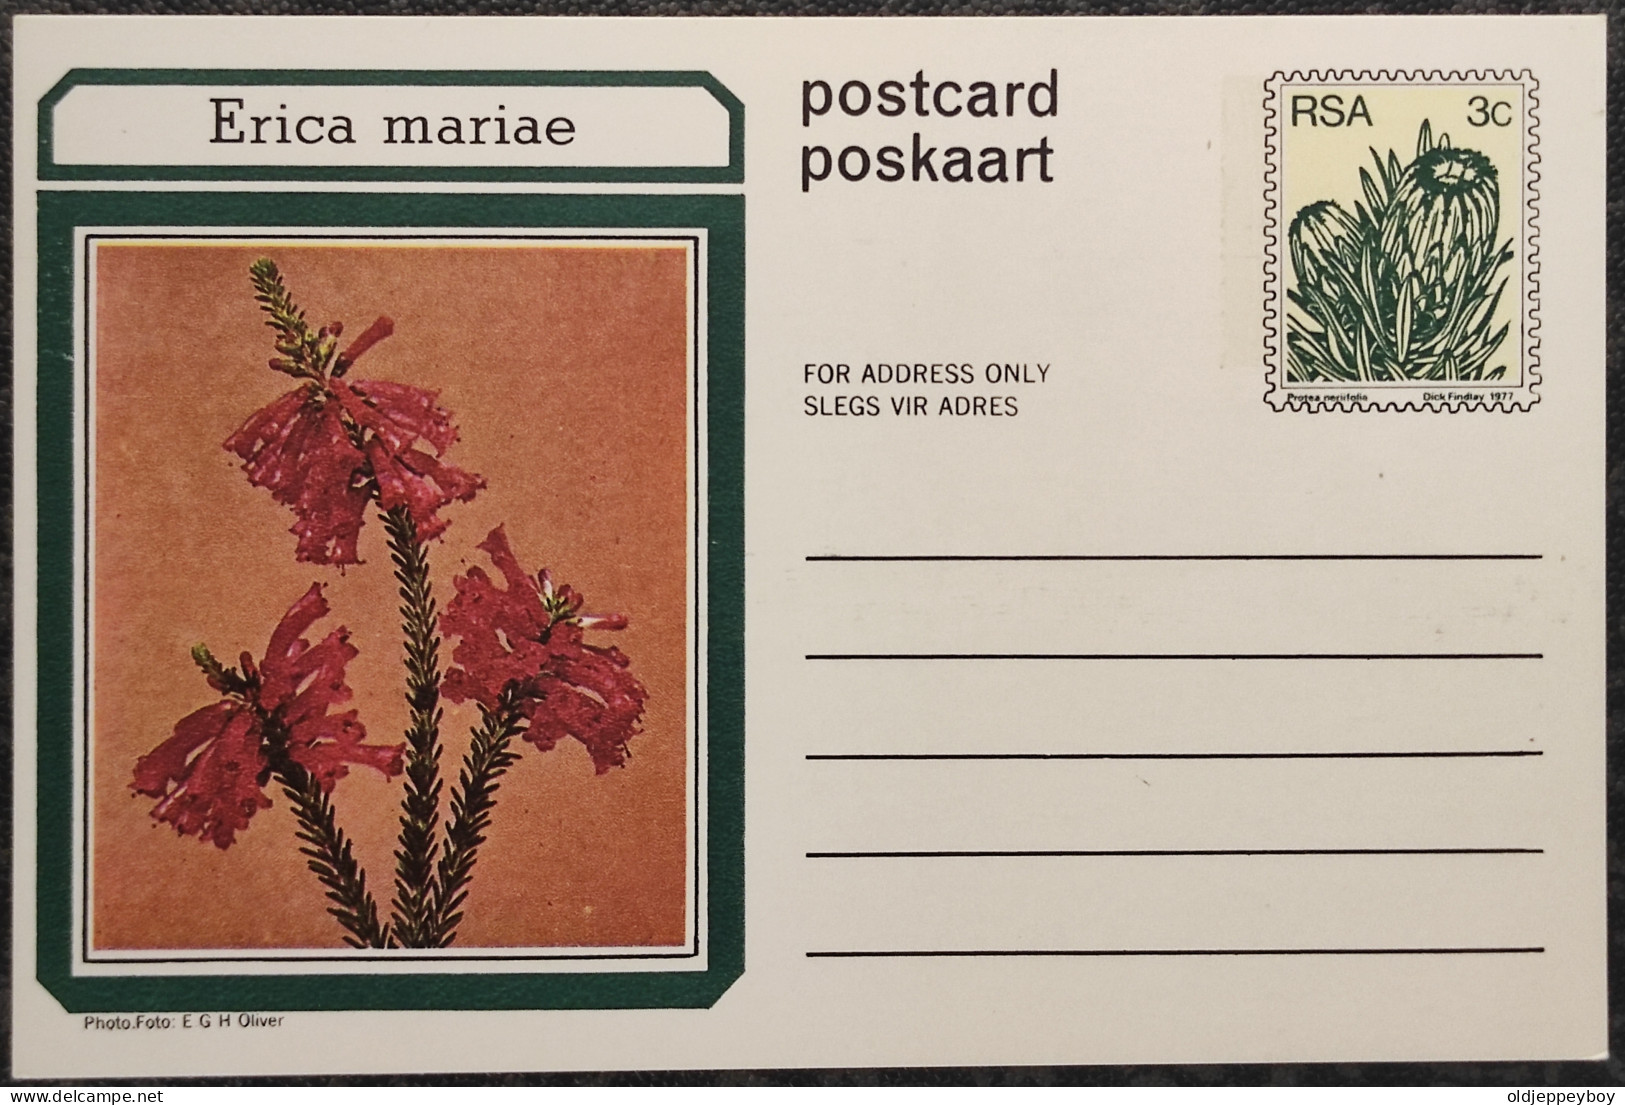 3c SOUTH AFRICA Postal STATIONERY CARD Illus ERICA MARIAE FLOWER Cover Stamps Flowers Rsa - Covers & Documents